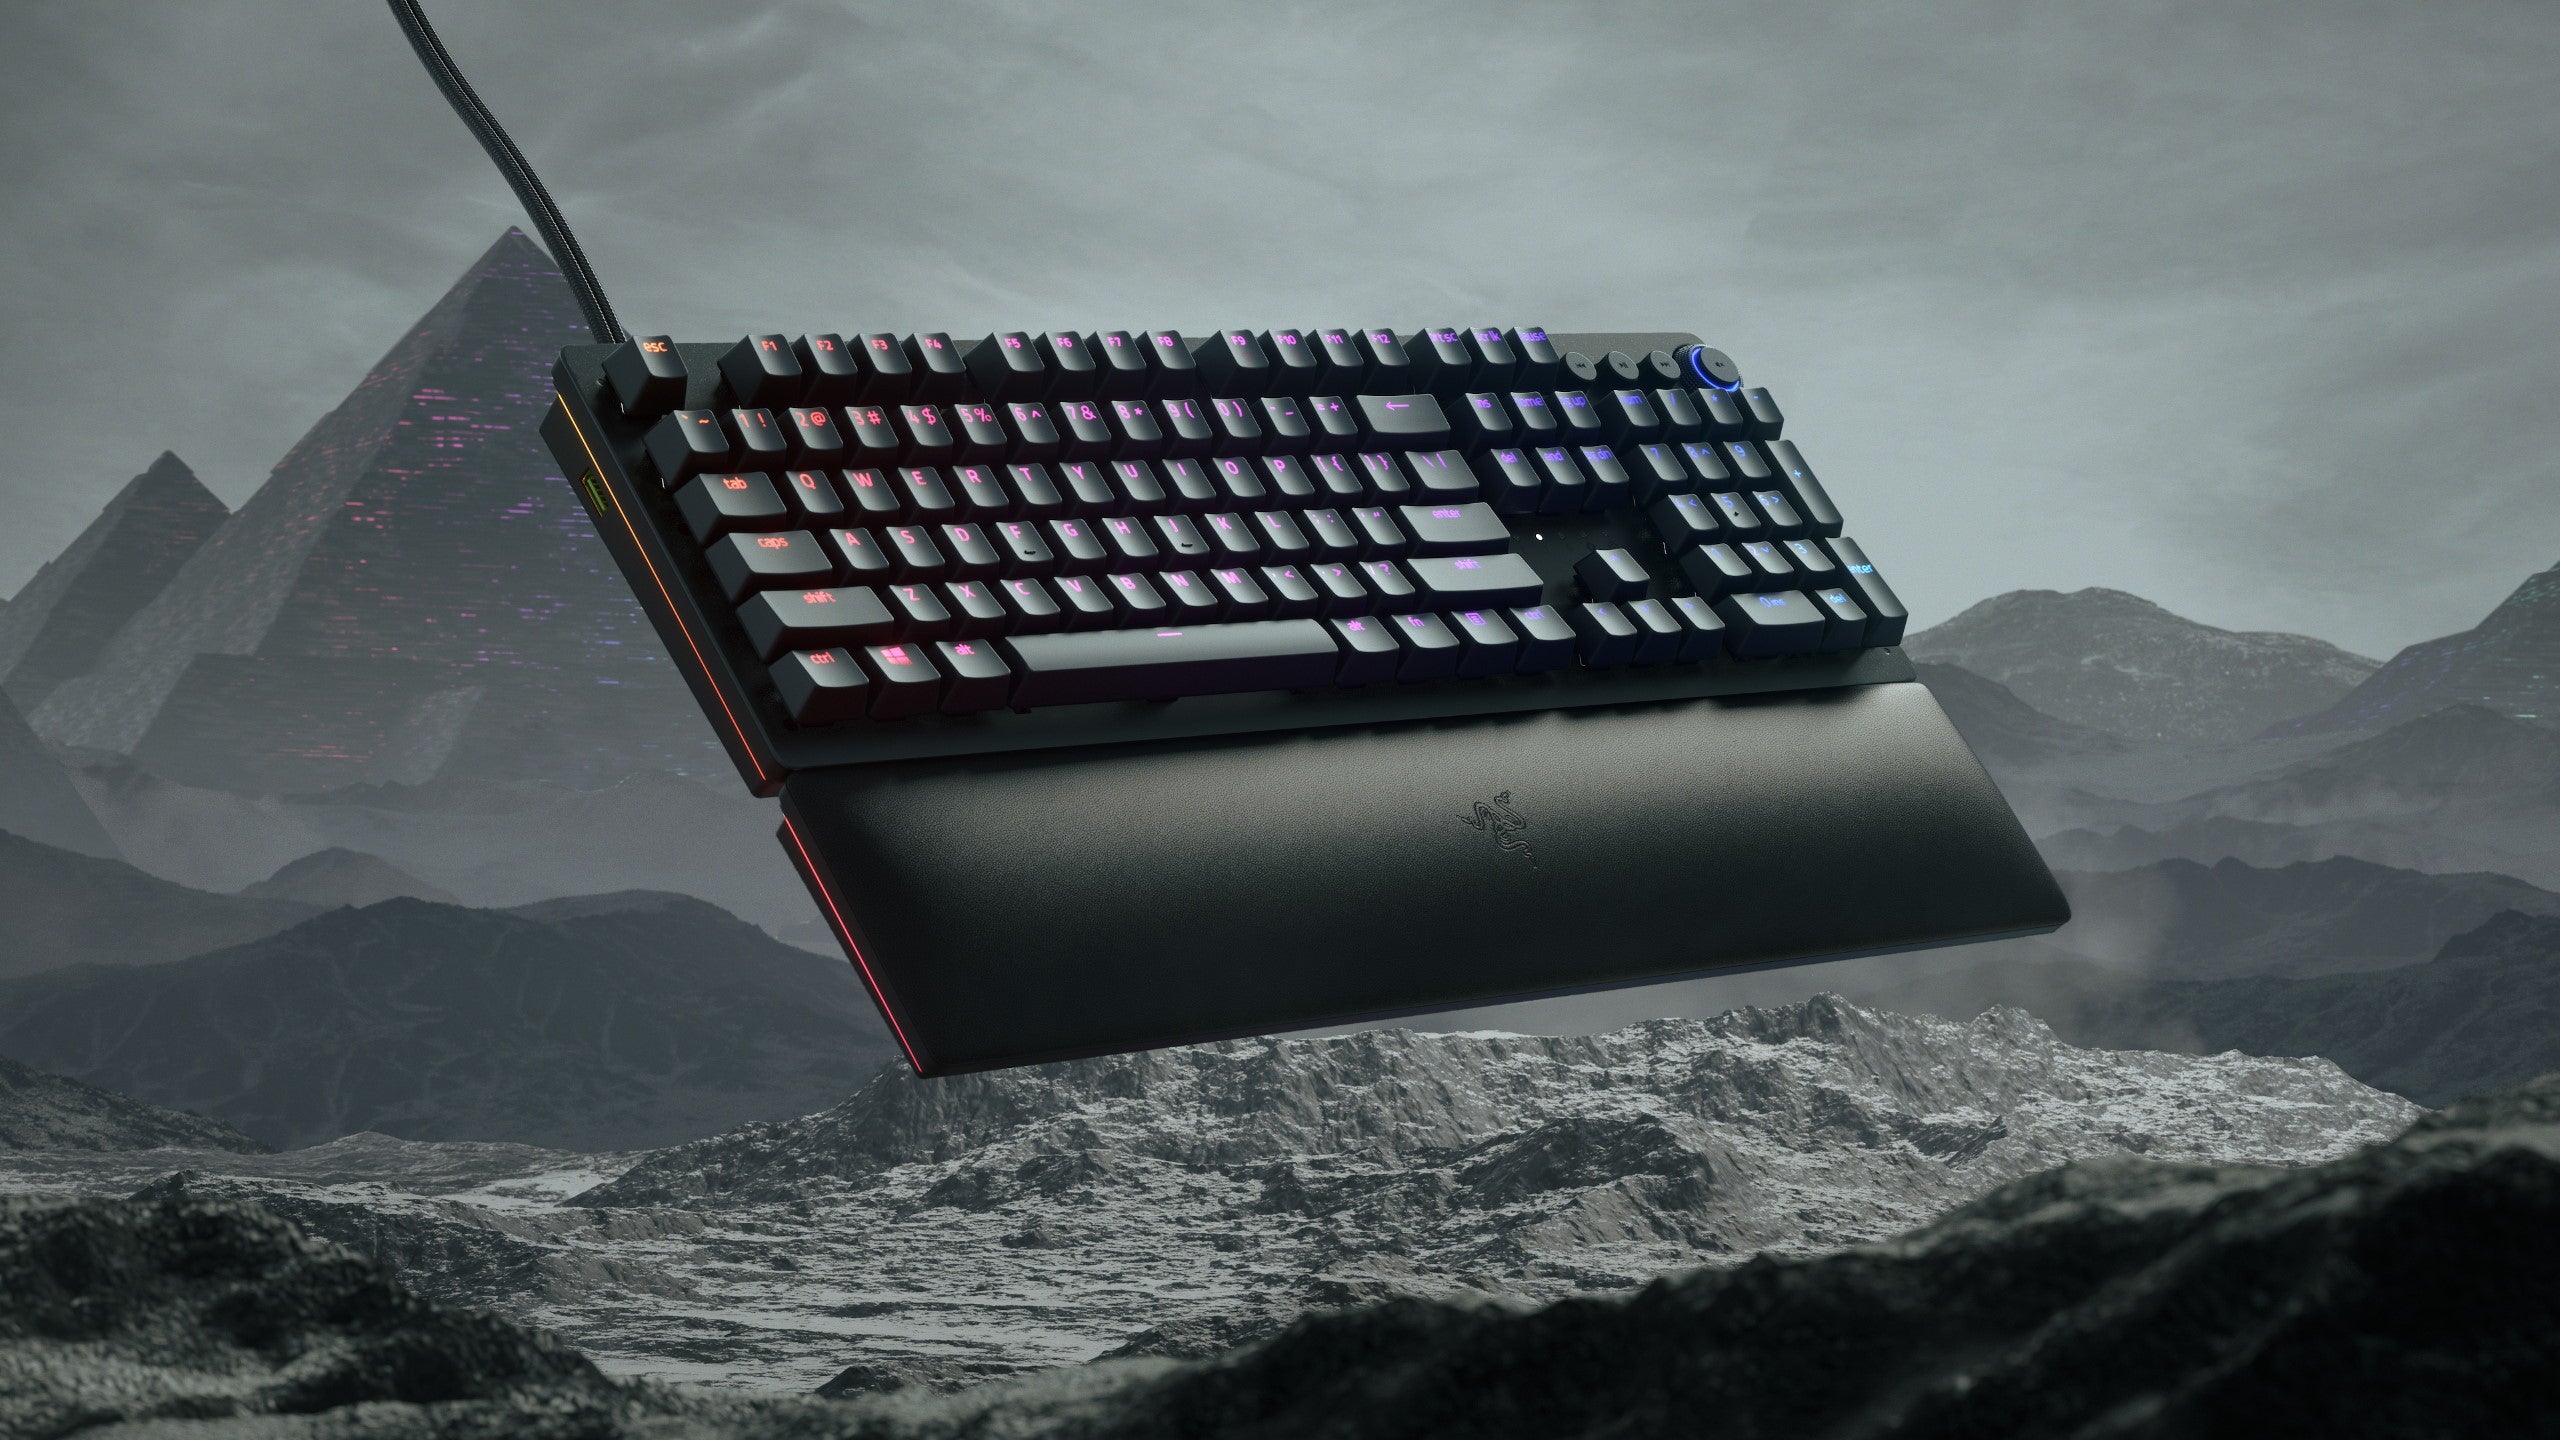 Razer is completely analog with their new Huntsman V2 keyboard